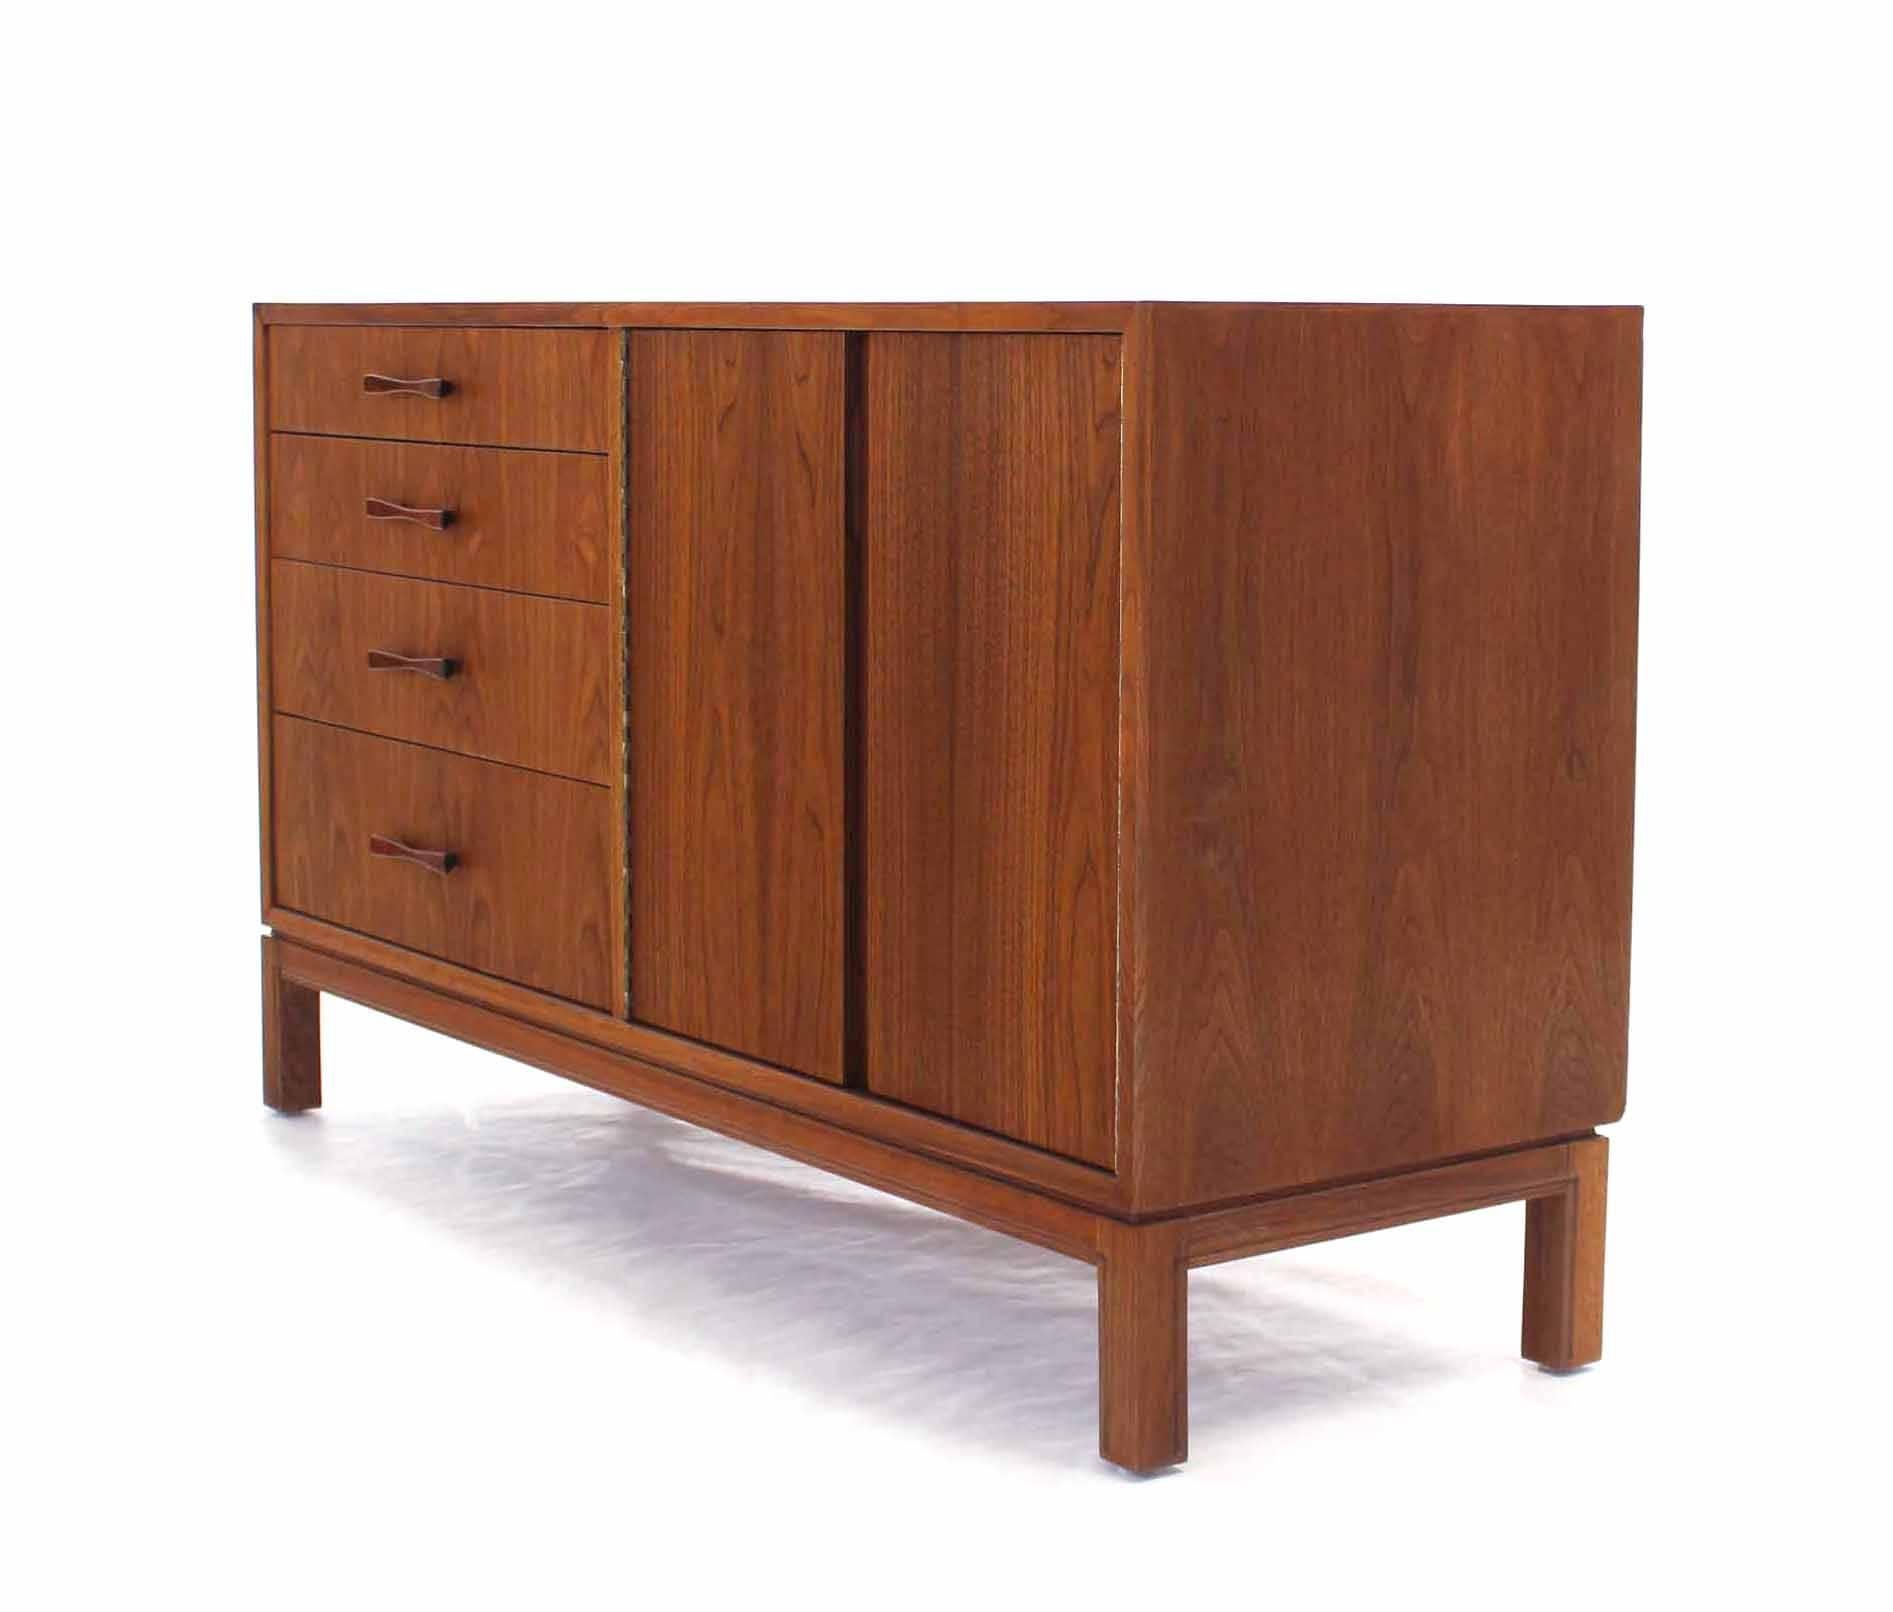 Mid-Century Modern Oiled Walnut Sideboard In Excellent Condition For Sale In Rockaway, NJ